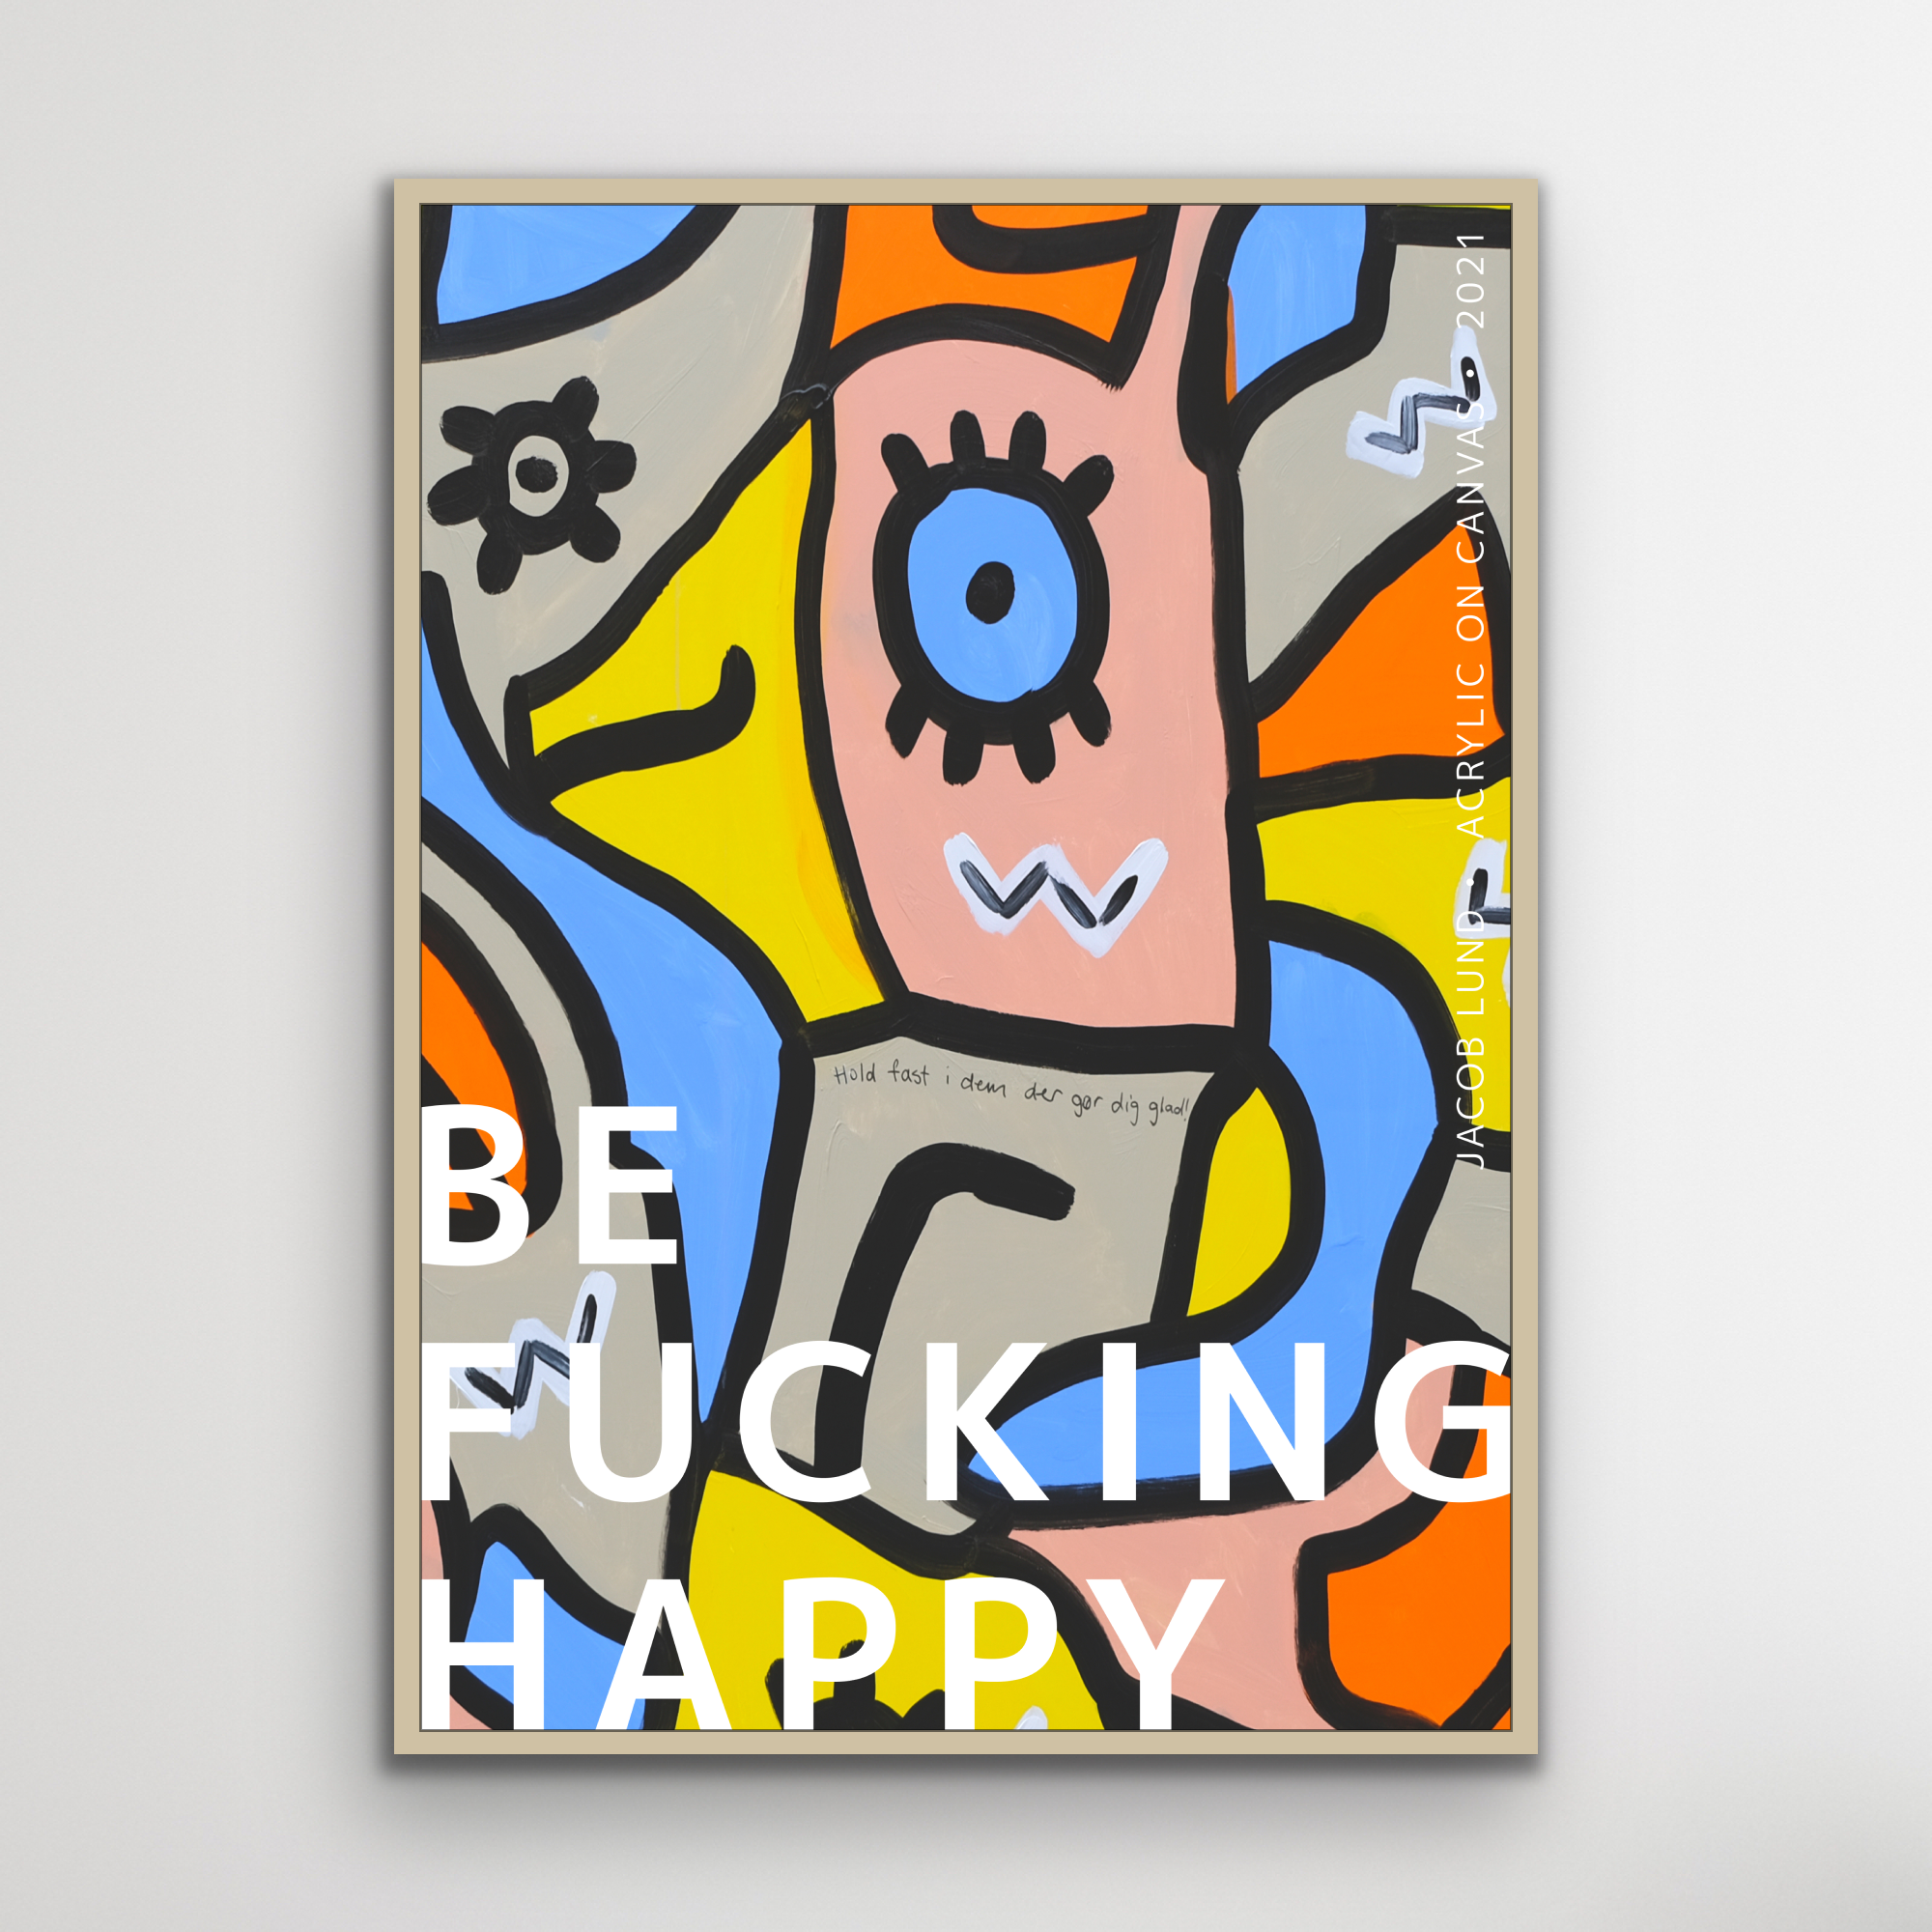 Poster: "Be F** Happy"